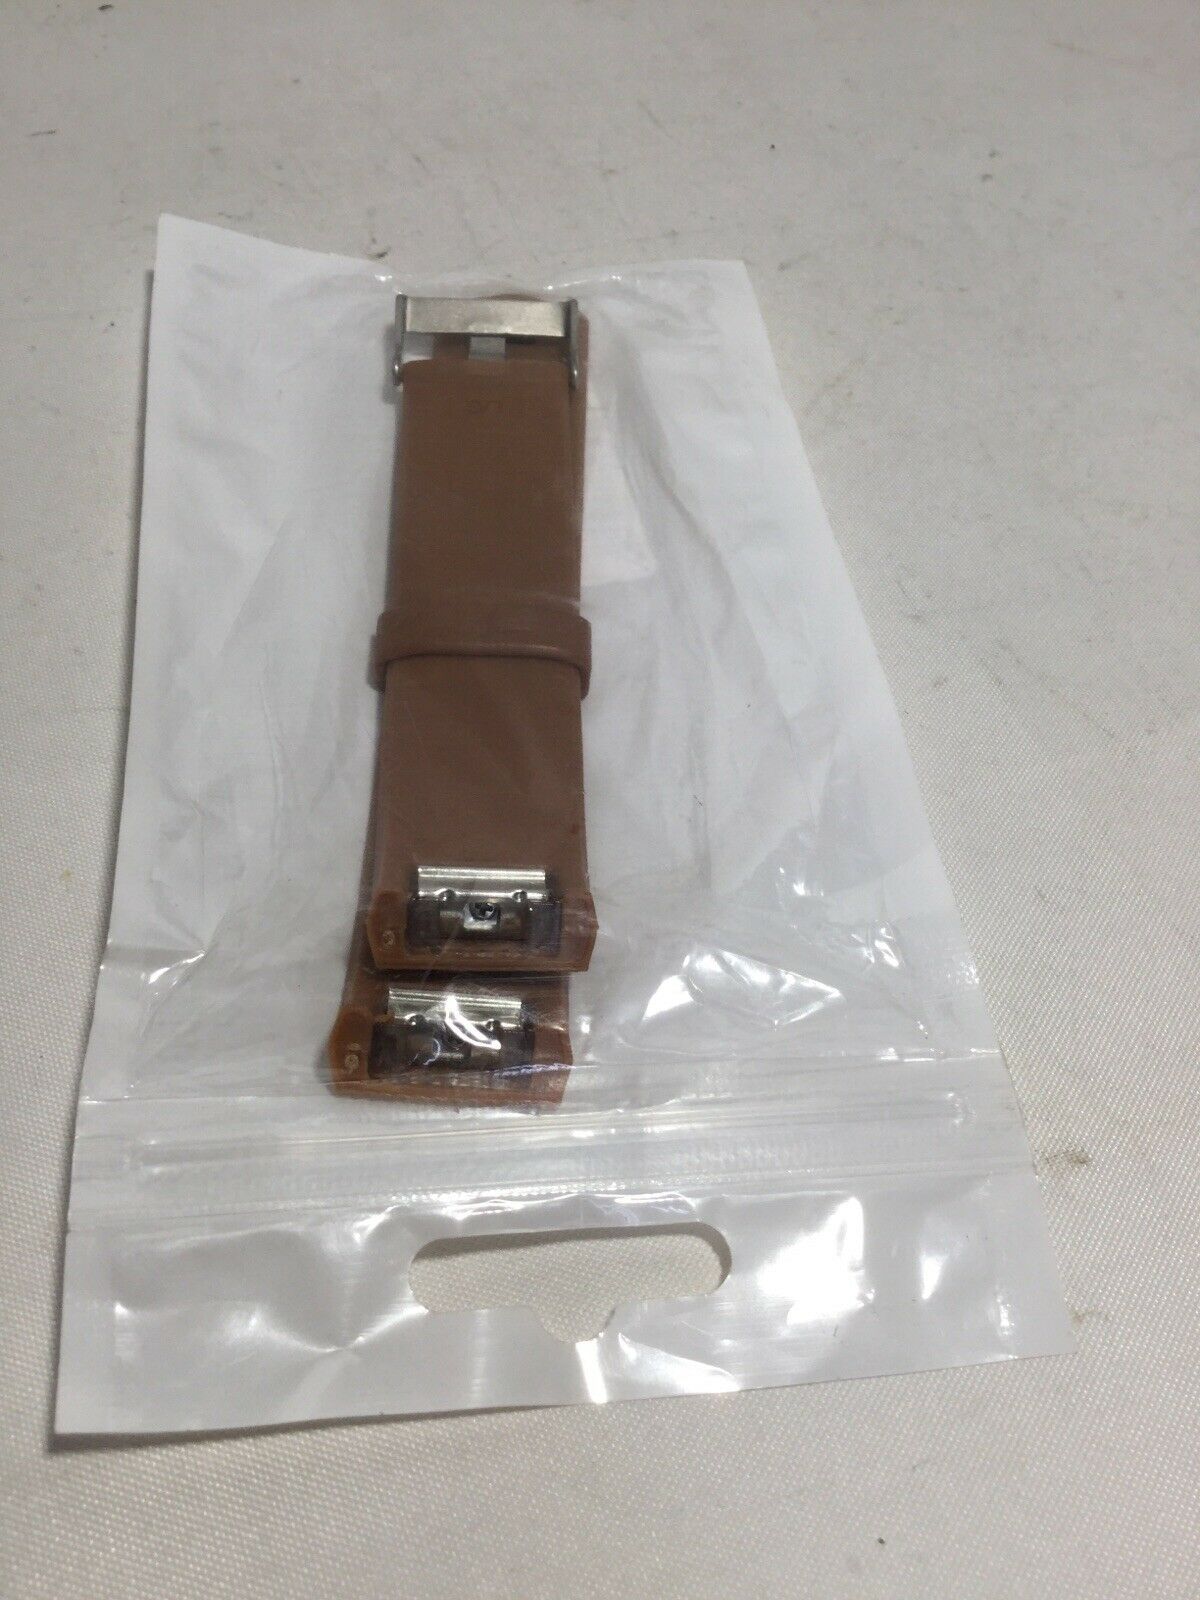 Replacement Band For FItbit Charge 2, Brown, L:arge